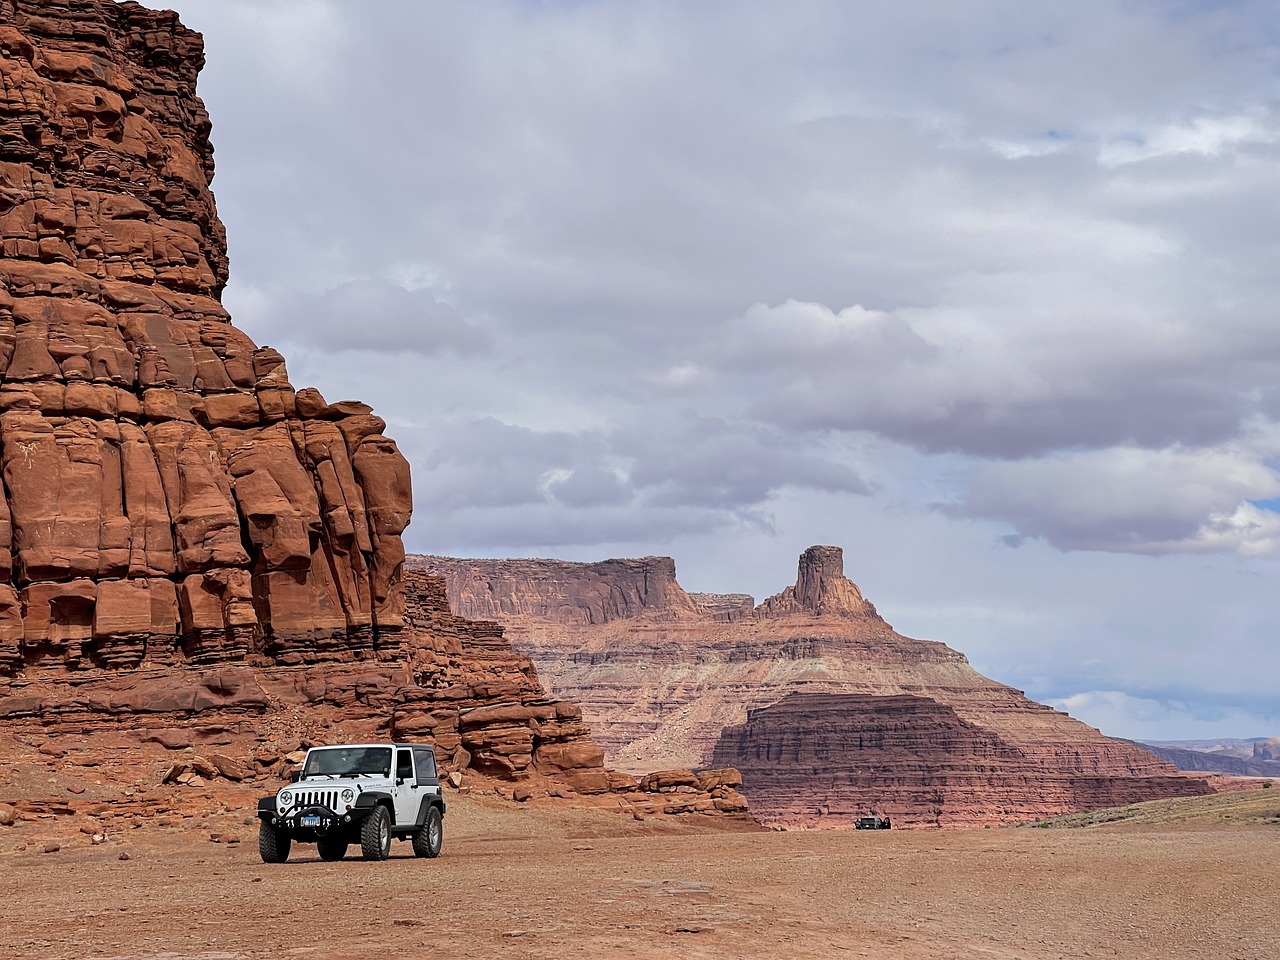 White Jeep parked on Jeep tour in a vast desert plain with towering red sandstone cliffs and buttes under a cloudy sky in Moab, Utah.